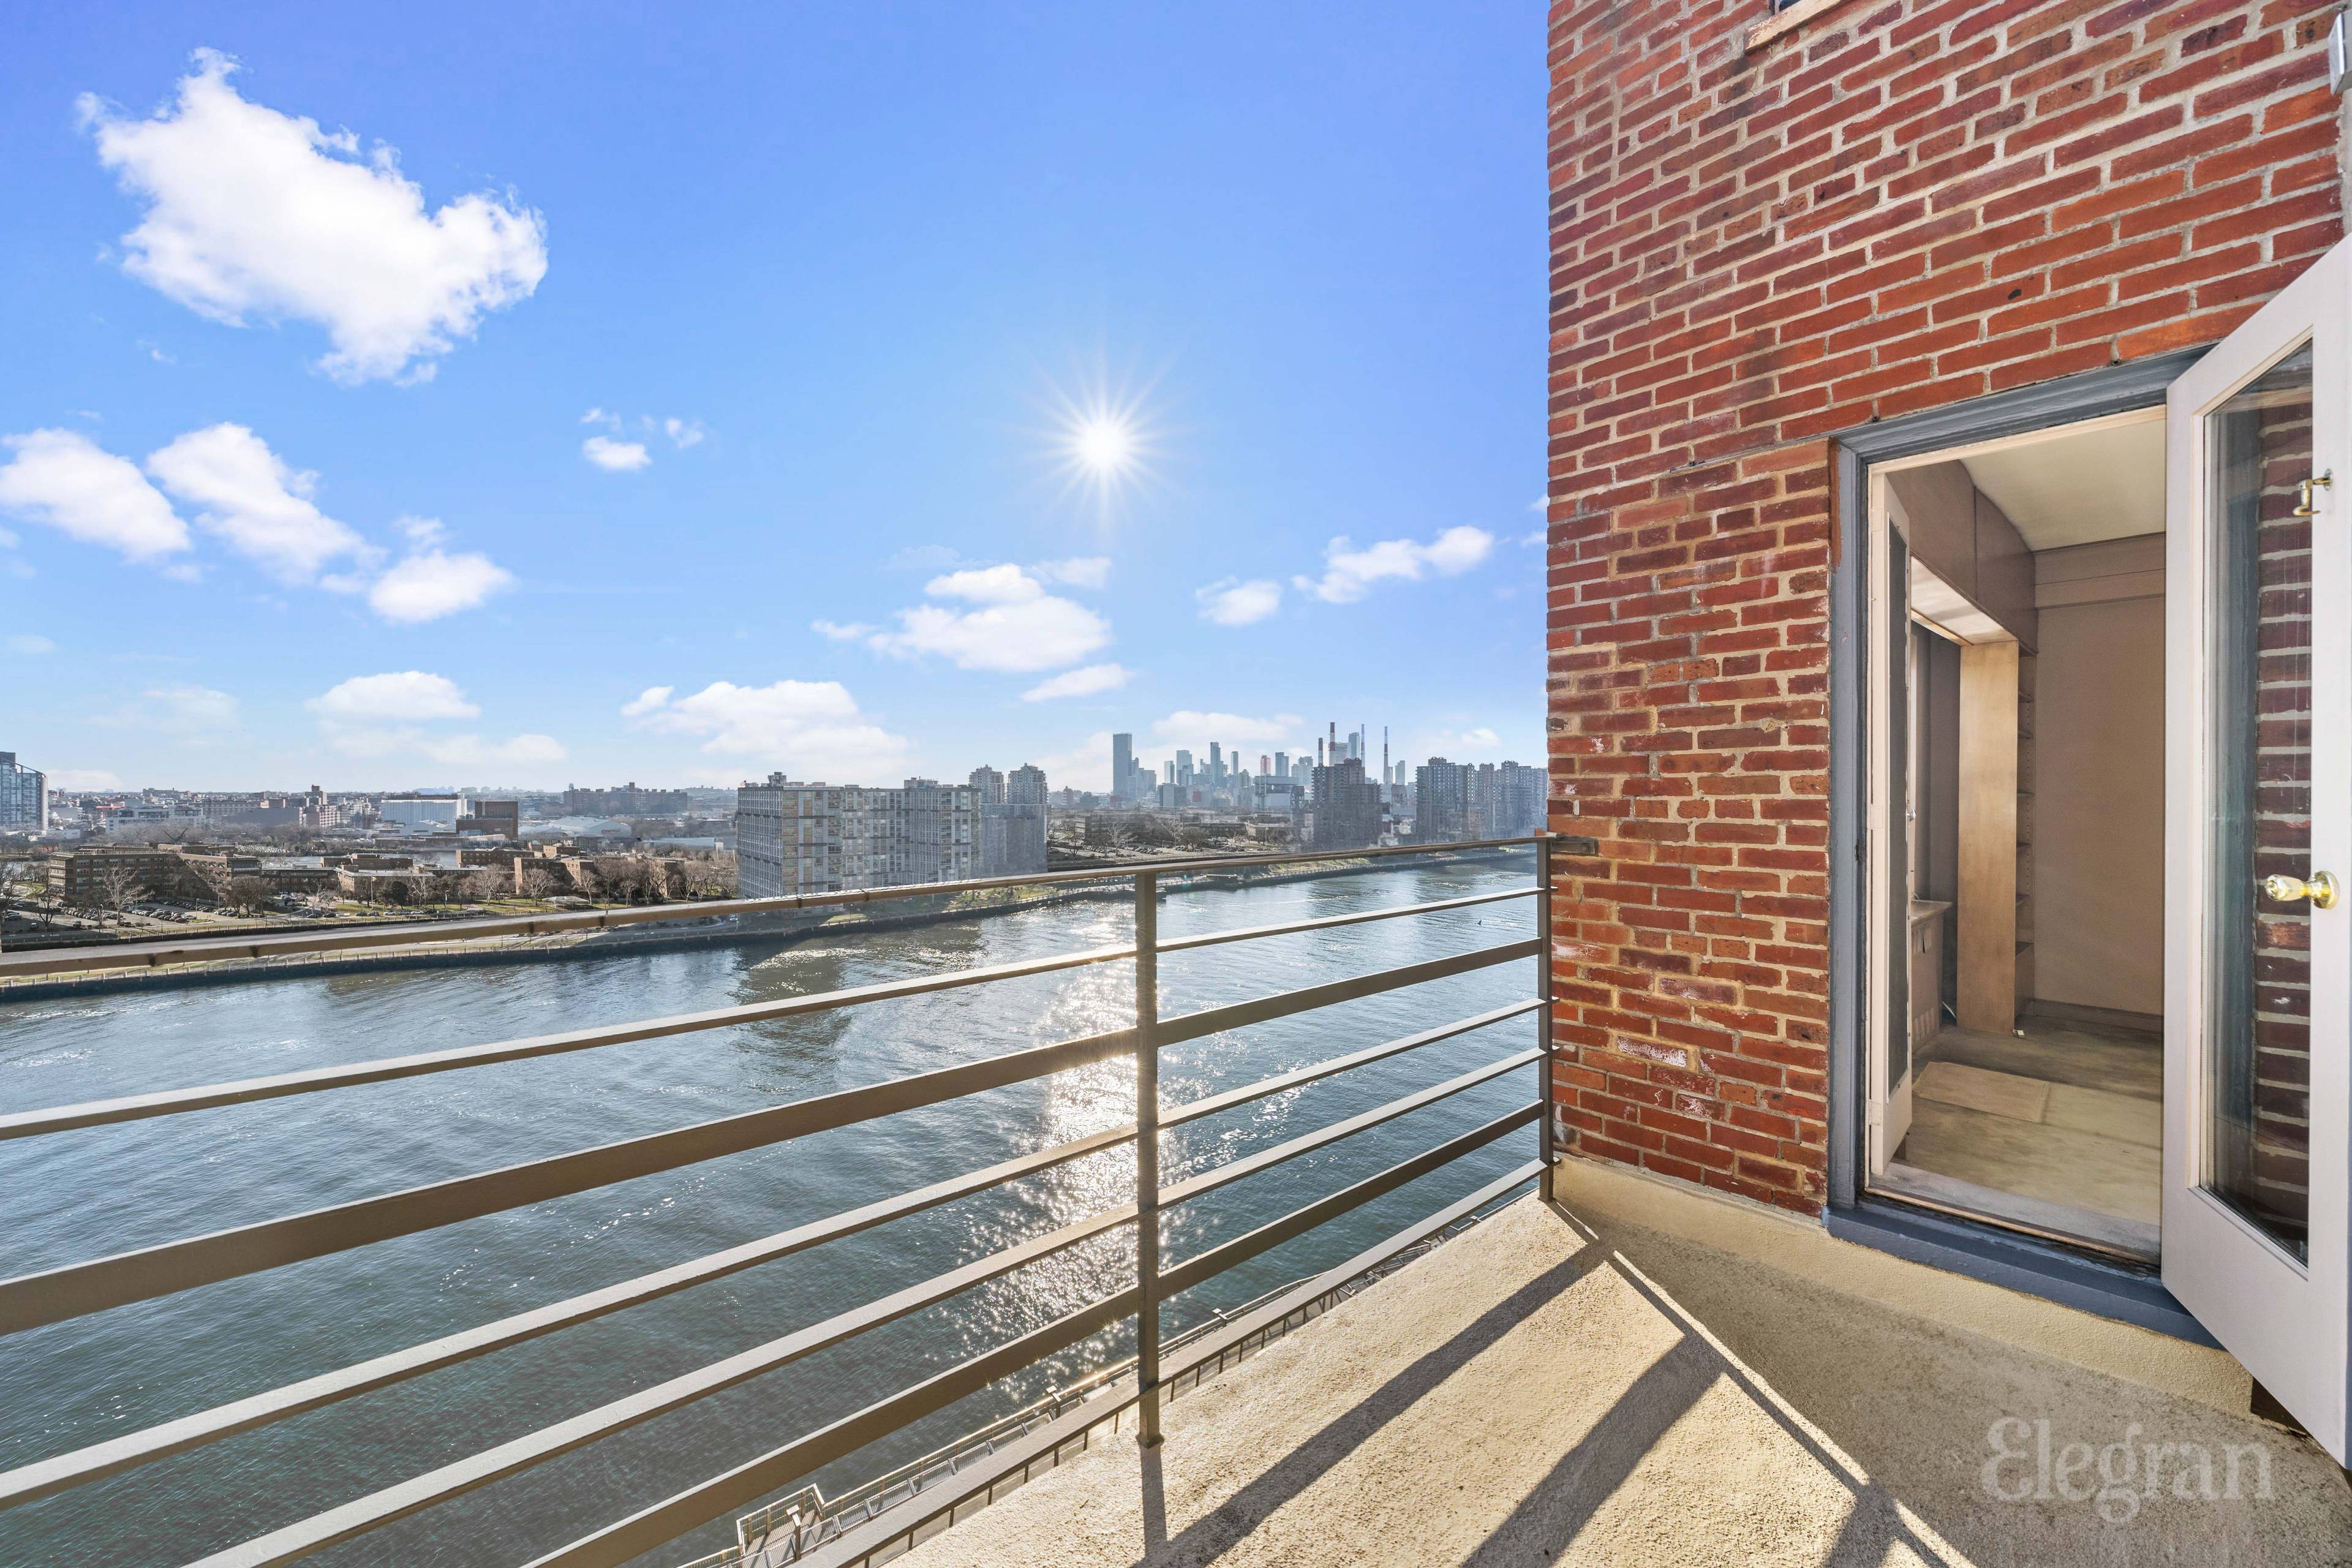 Elevated living with panoramic river views with endless possibilities to craft your dream home.